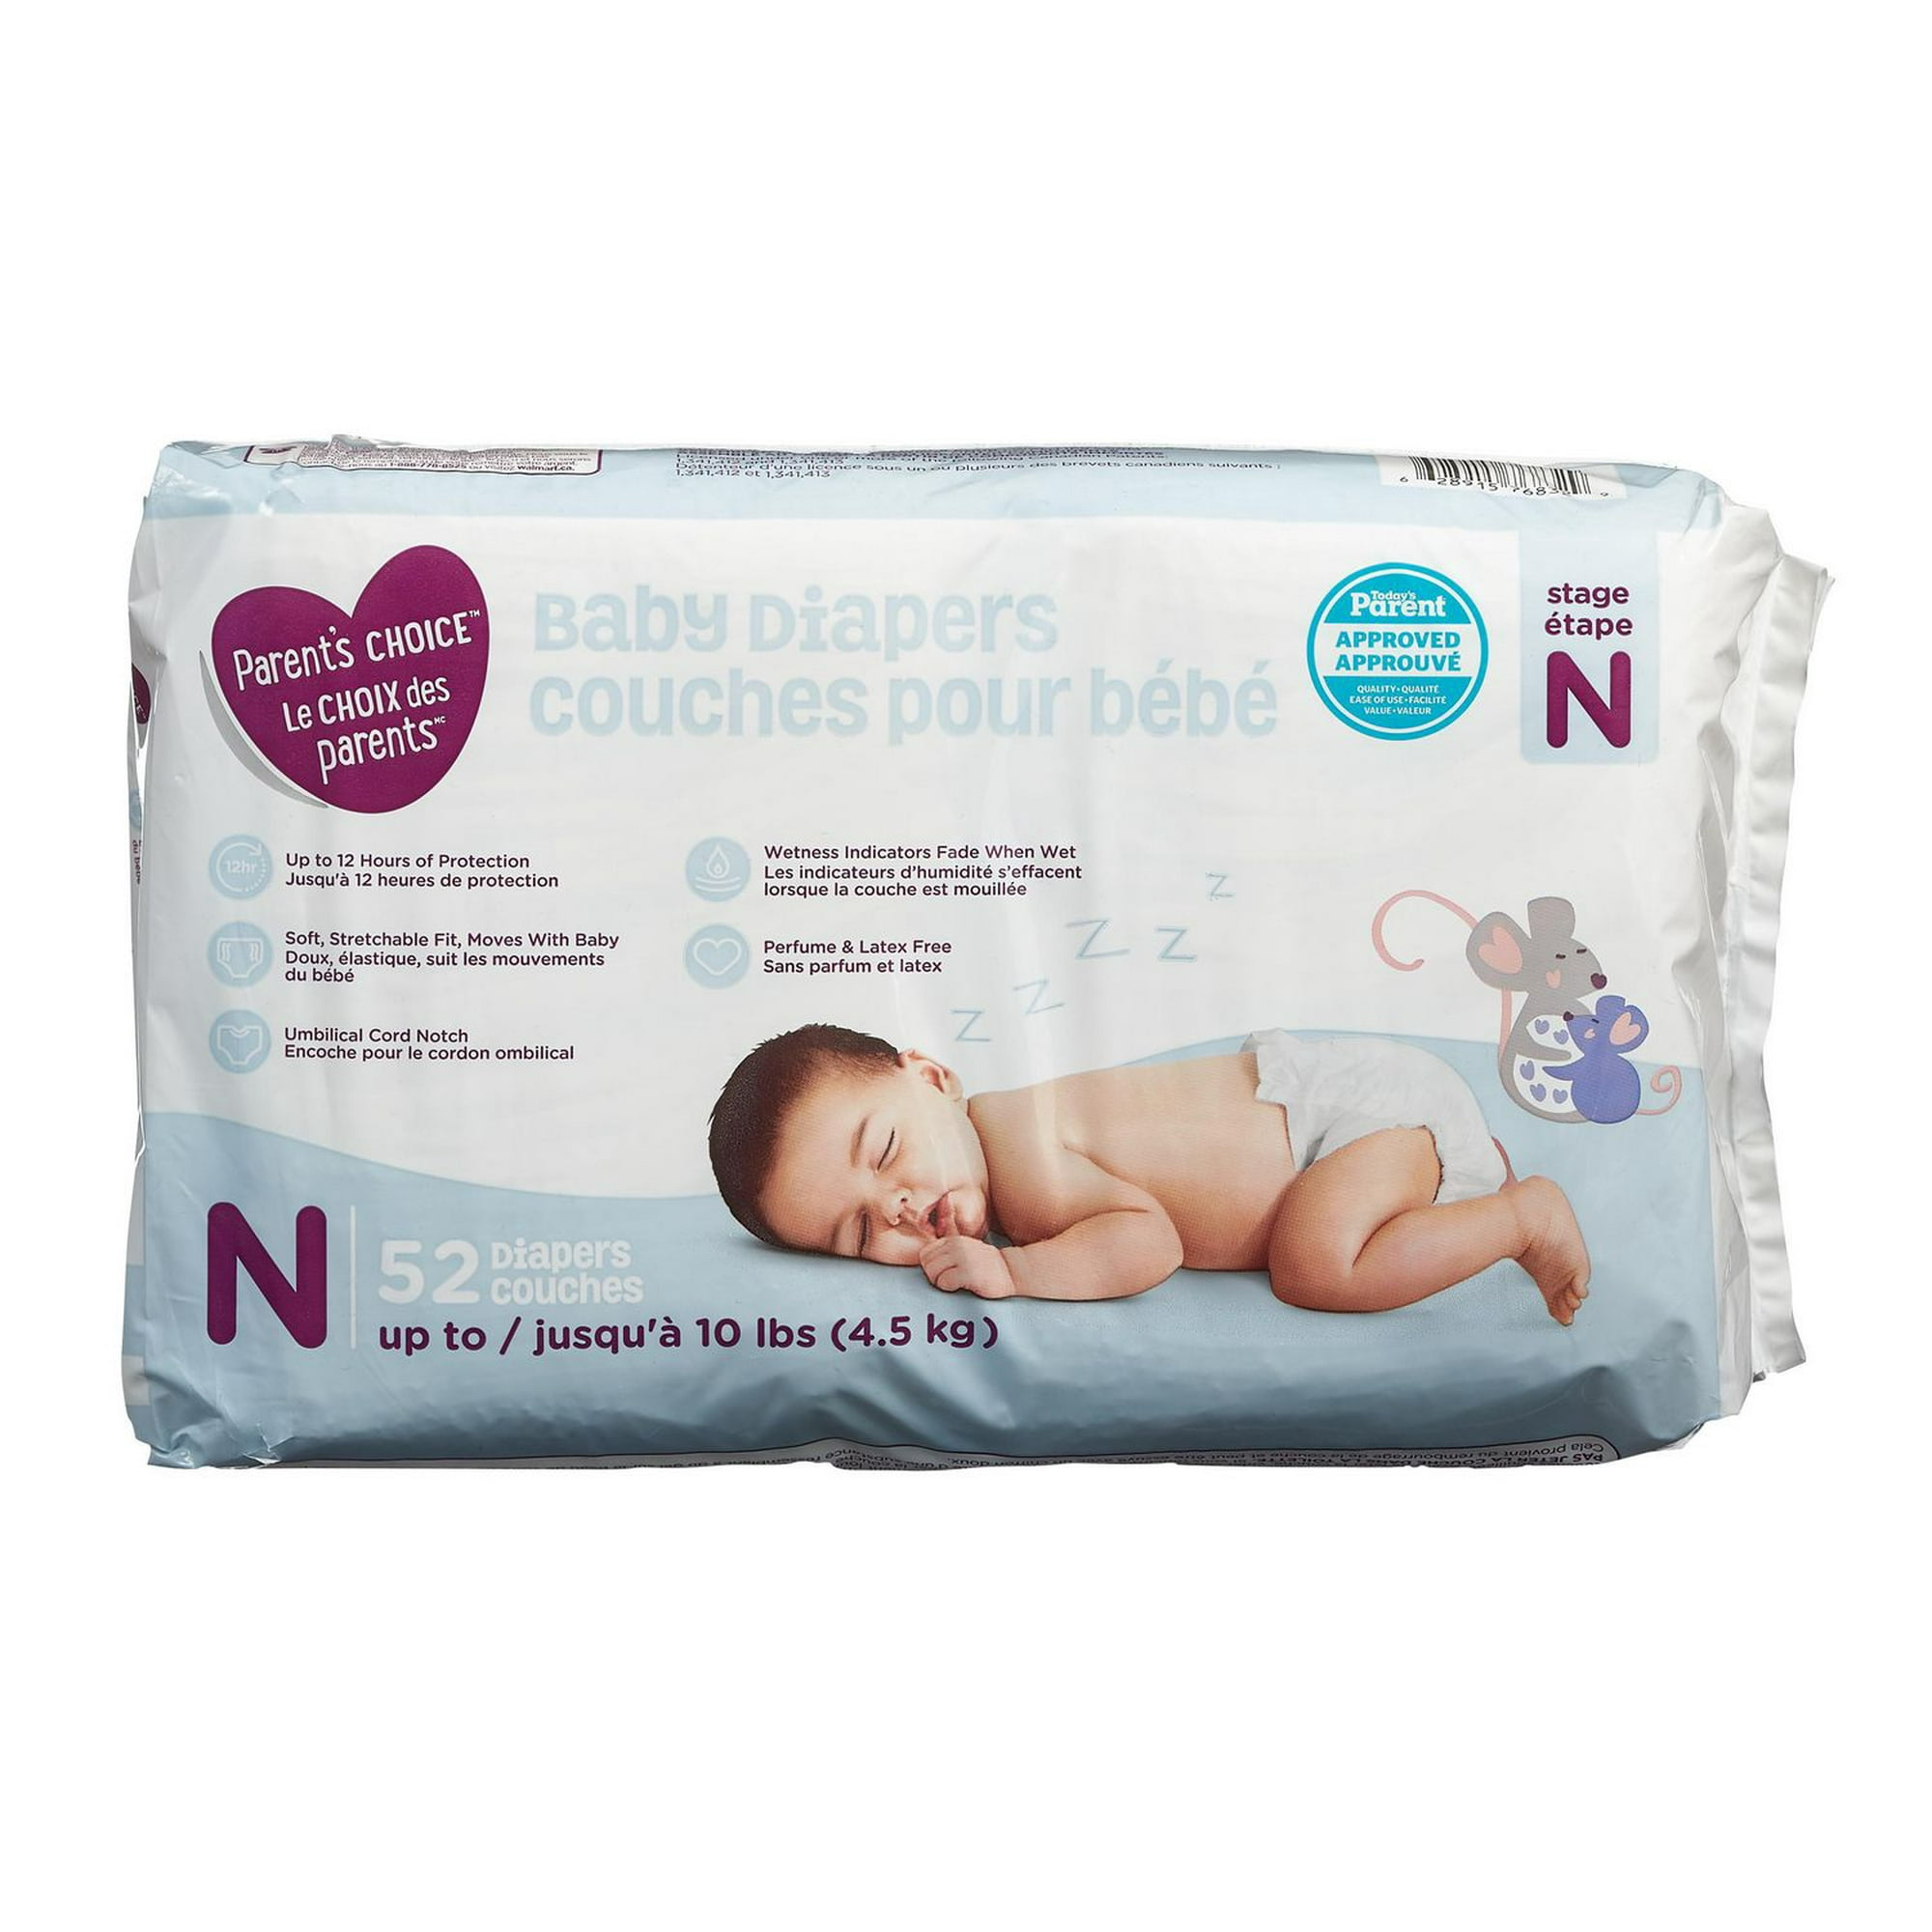 Parent's Choice Baby Diapers Review